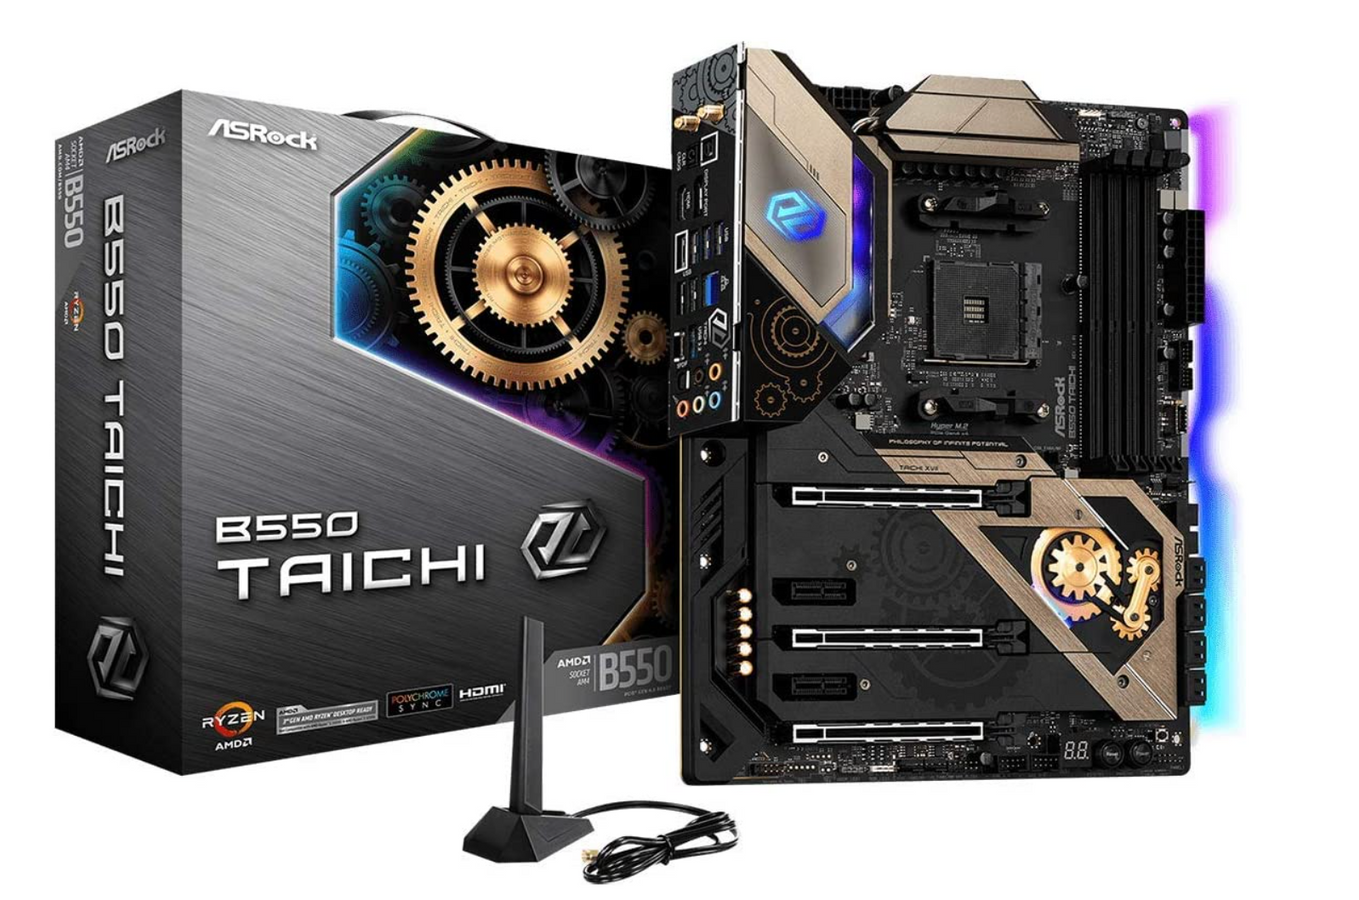 AsRock B550 Taichi product image of a black motherboard with gold components and blue and purple lighting.